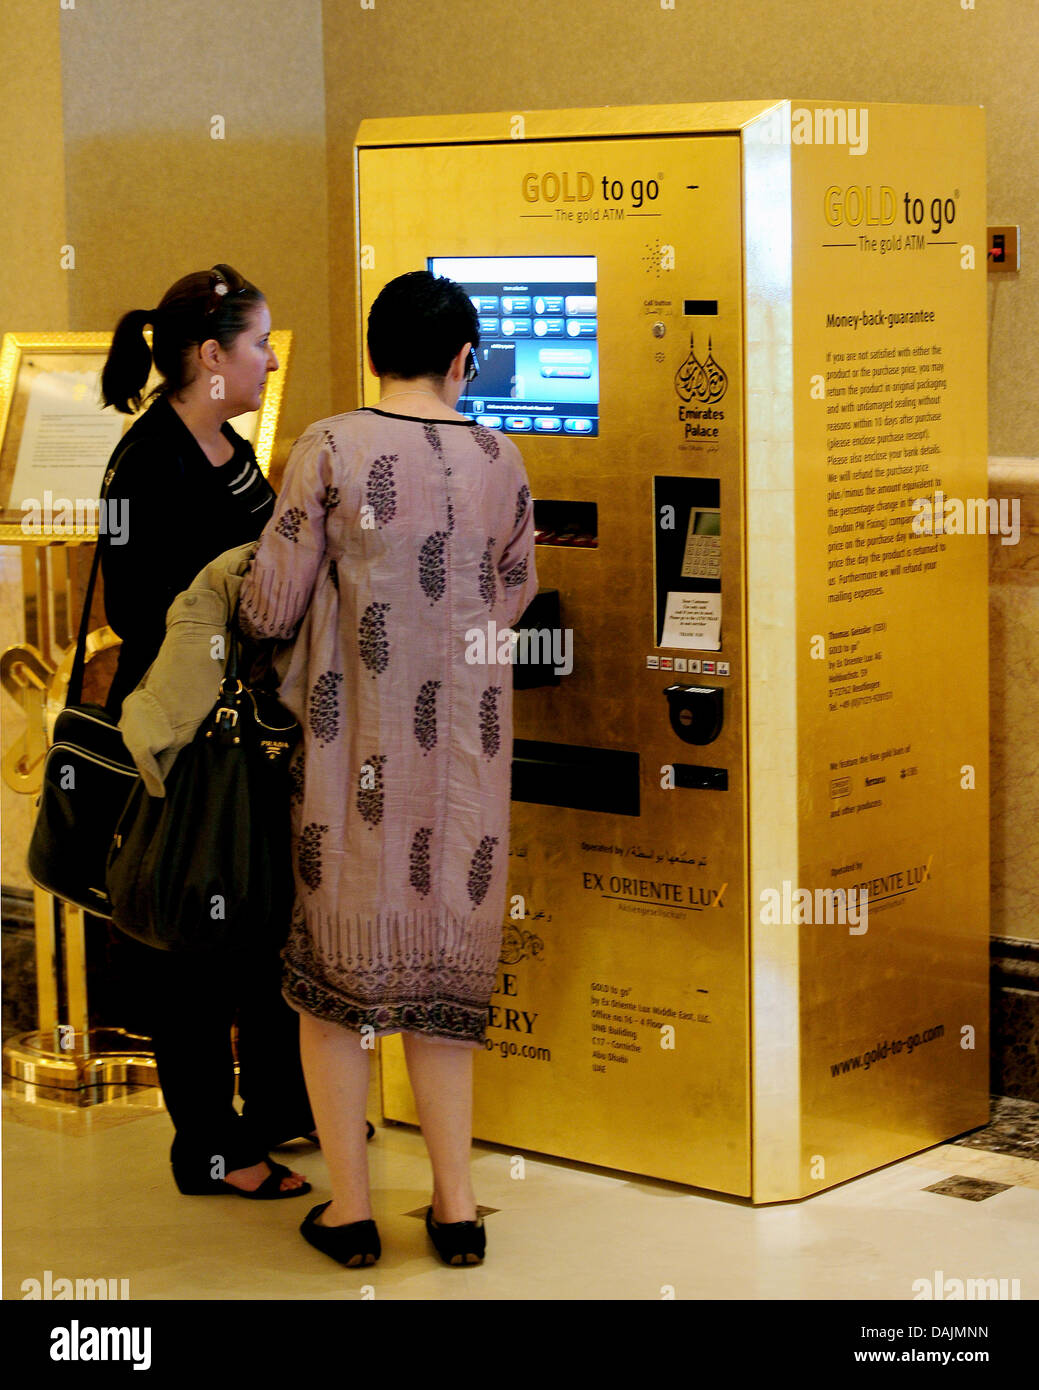 Two women stand in front of an automatic teller machine inside the Emirates Palace Hotel in Abu Dhabi, United Arab Emirates, 20 April 2011. The price for a fine ounce (approximately 31 grammes) of gold is dealt in US dollars. A year ago, the price was about 1,150 dollars. Right now, the price is at an all-time high with 1,500 dollars. Photo: HANNIBAL Stock Photo